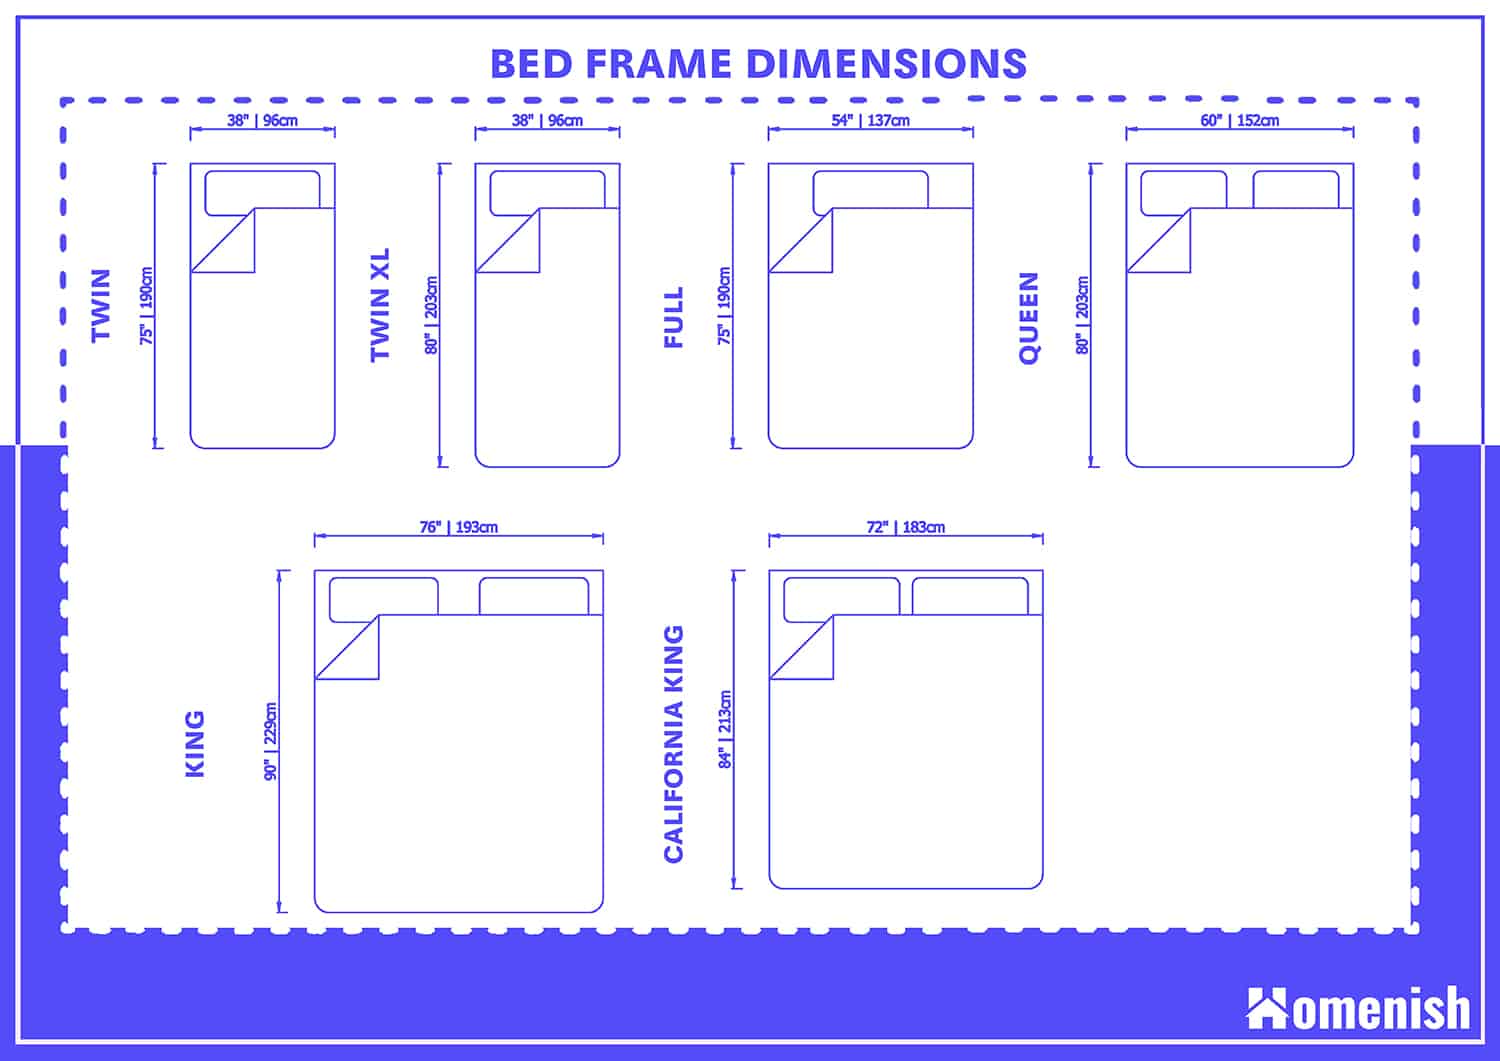 bed frame dimensions compared to mattress size